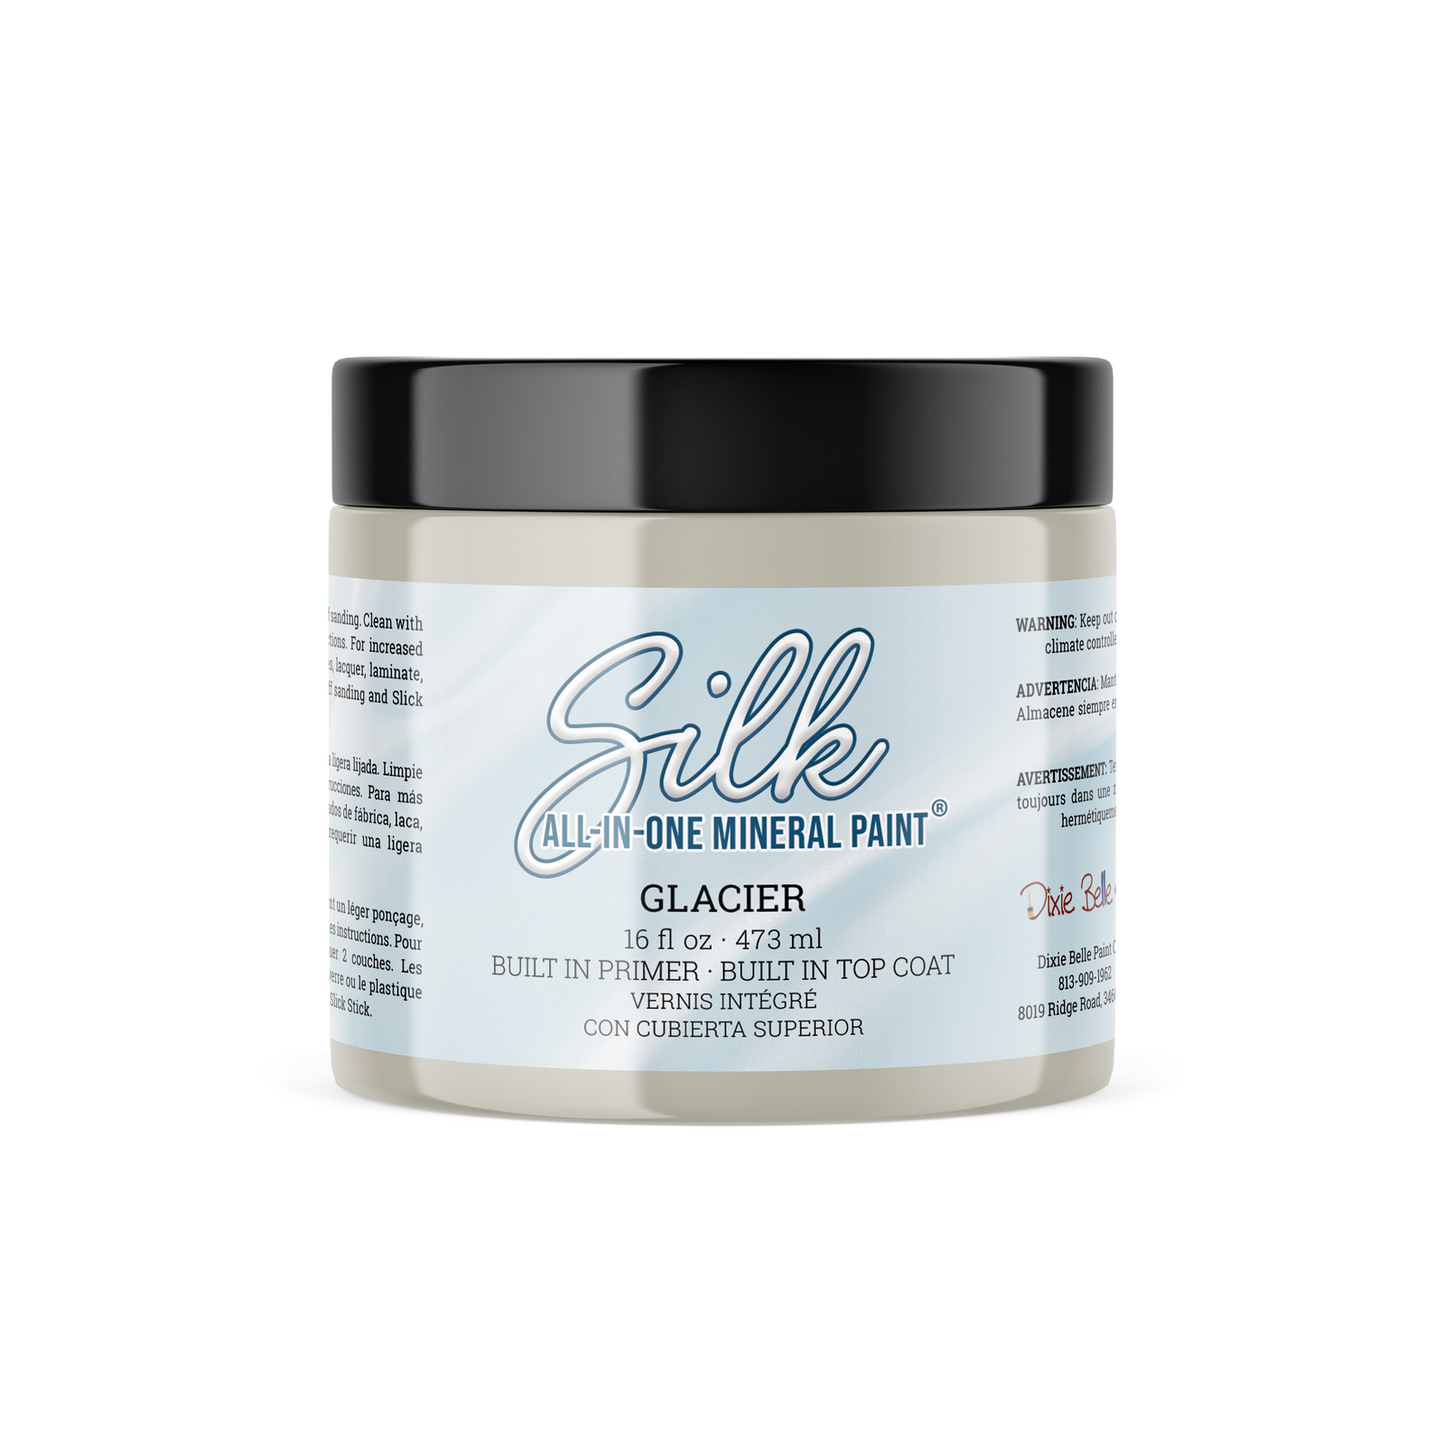 Glacier- SILK All-in-one Mineral Paint